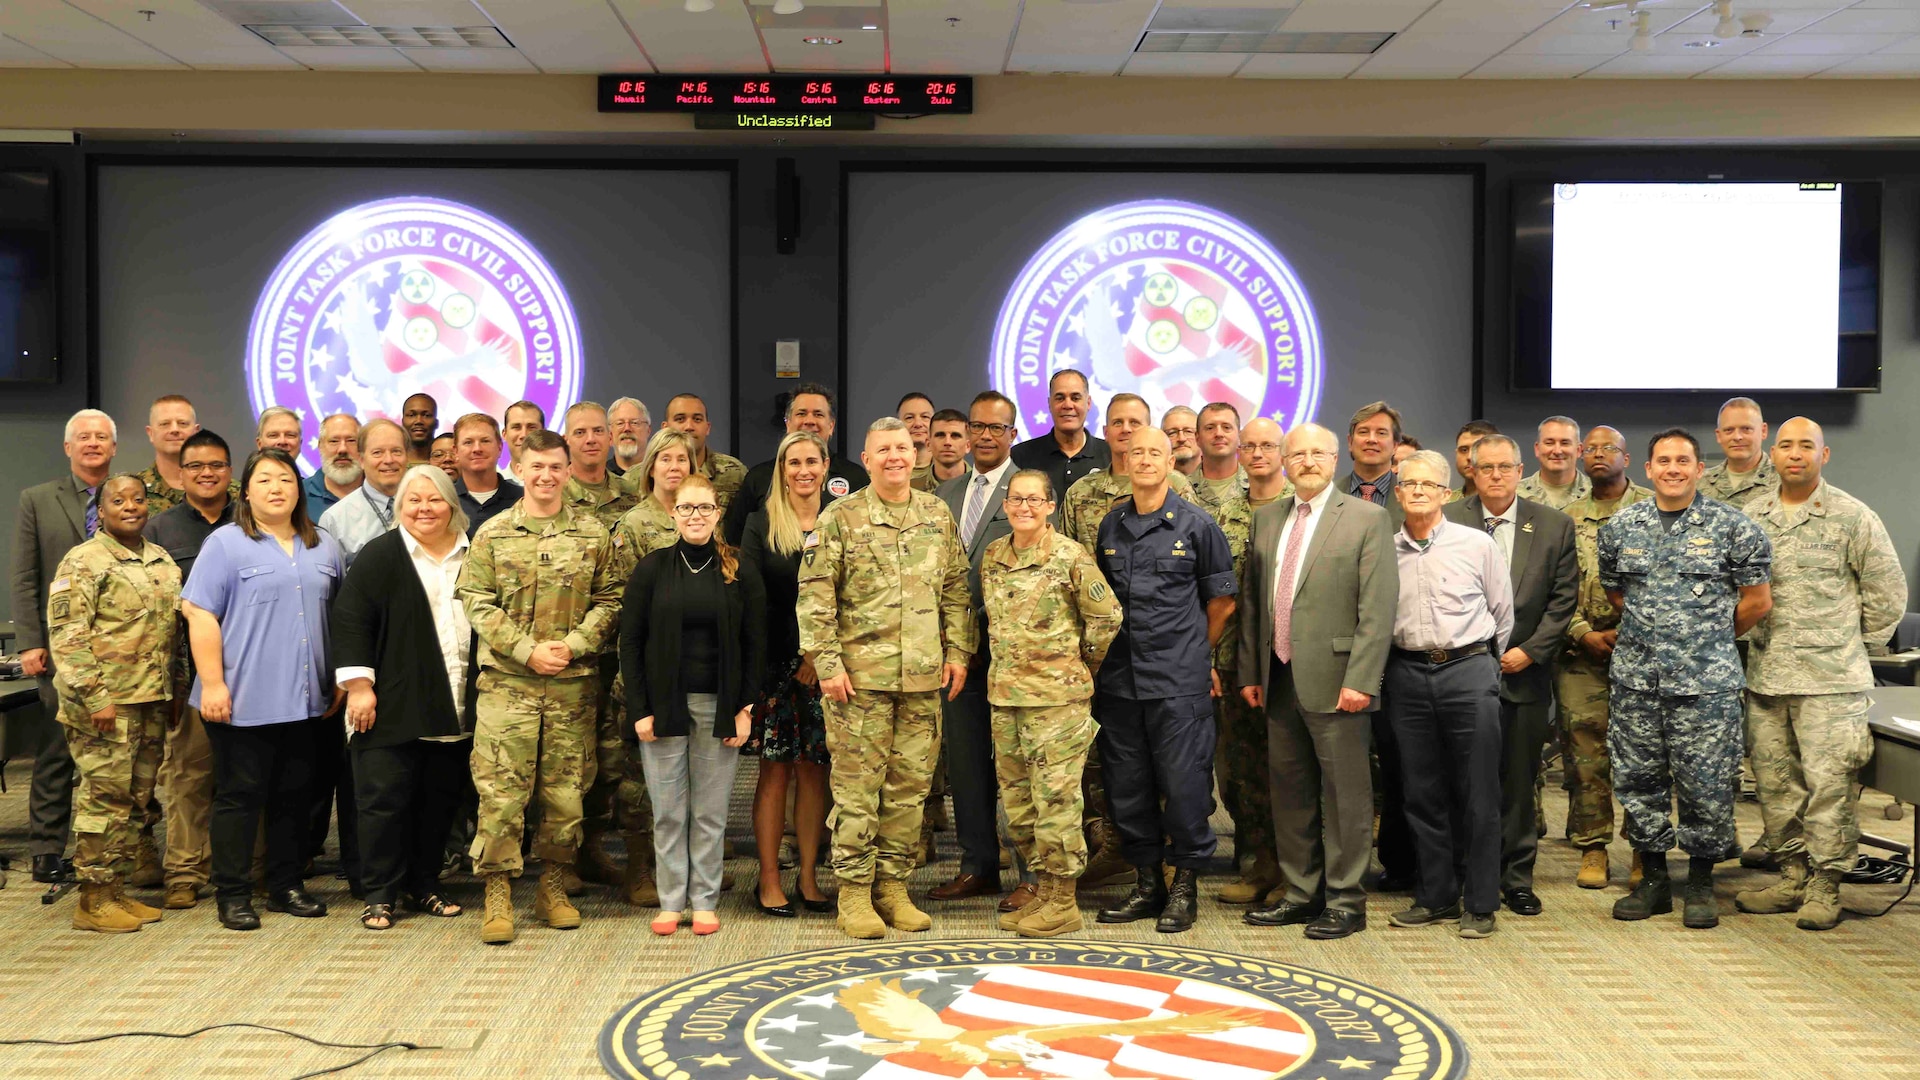 On June 25-26, 2019, Joint Task Force Civil Support (JTF-CS), hosted exercise Vista Proximity II (VP II) at Joint Base Langley-Eustis. VP II is a tabletop exercise created by United States Northern Command (USNORTHCOM) that brings together national, regional and local partners to evaluate the combined large-scale response for a biological incident within the continental US. 
The exercise was an opportunity to create a bridge for smooth planning between agencies that will partner together in the event of a public health emergency.